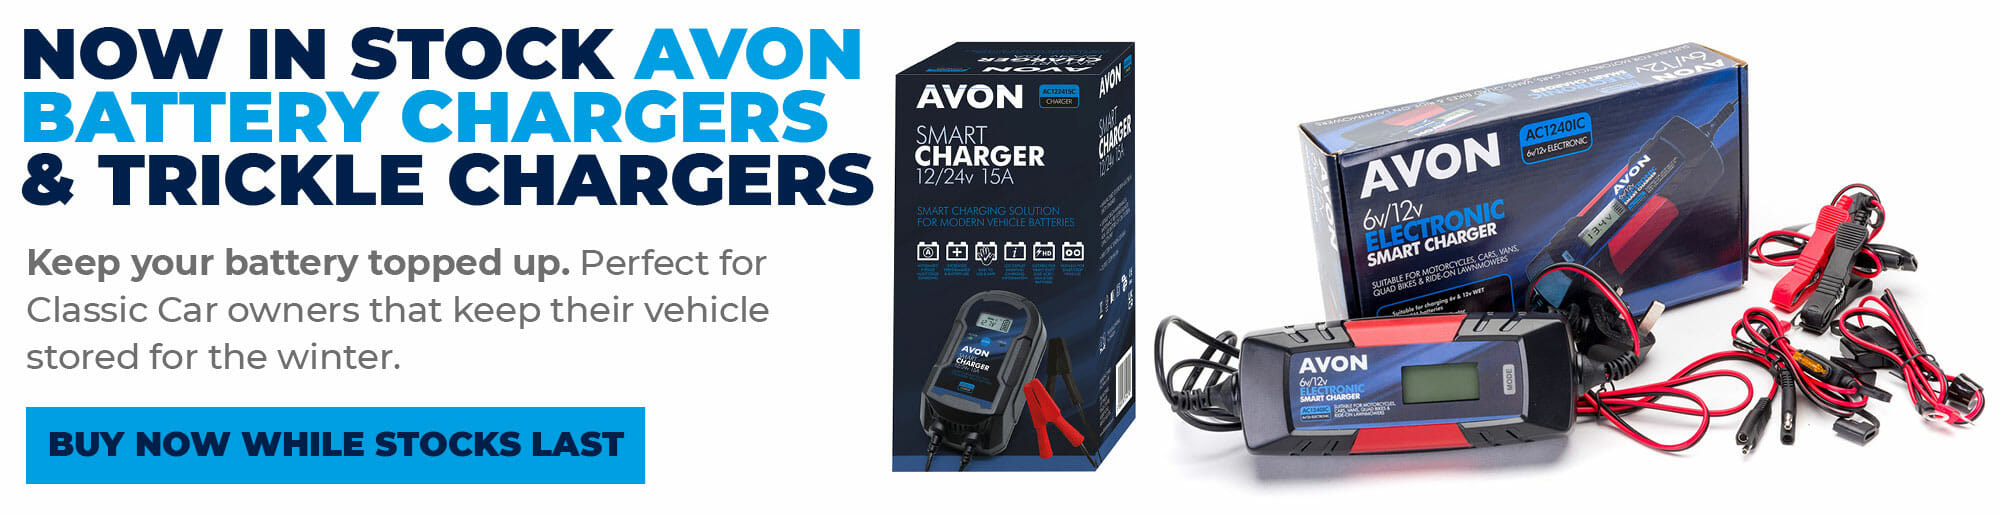 Avon Battery Chargers